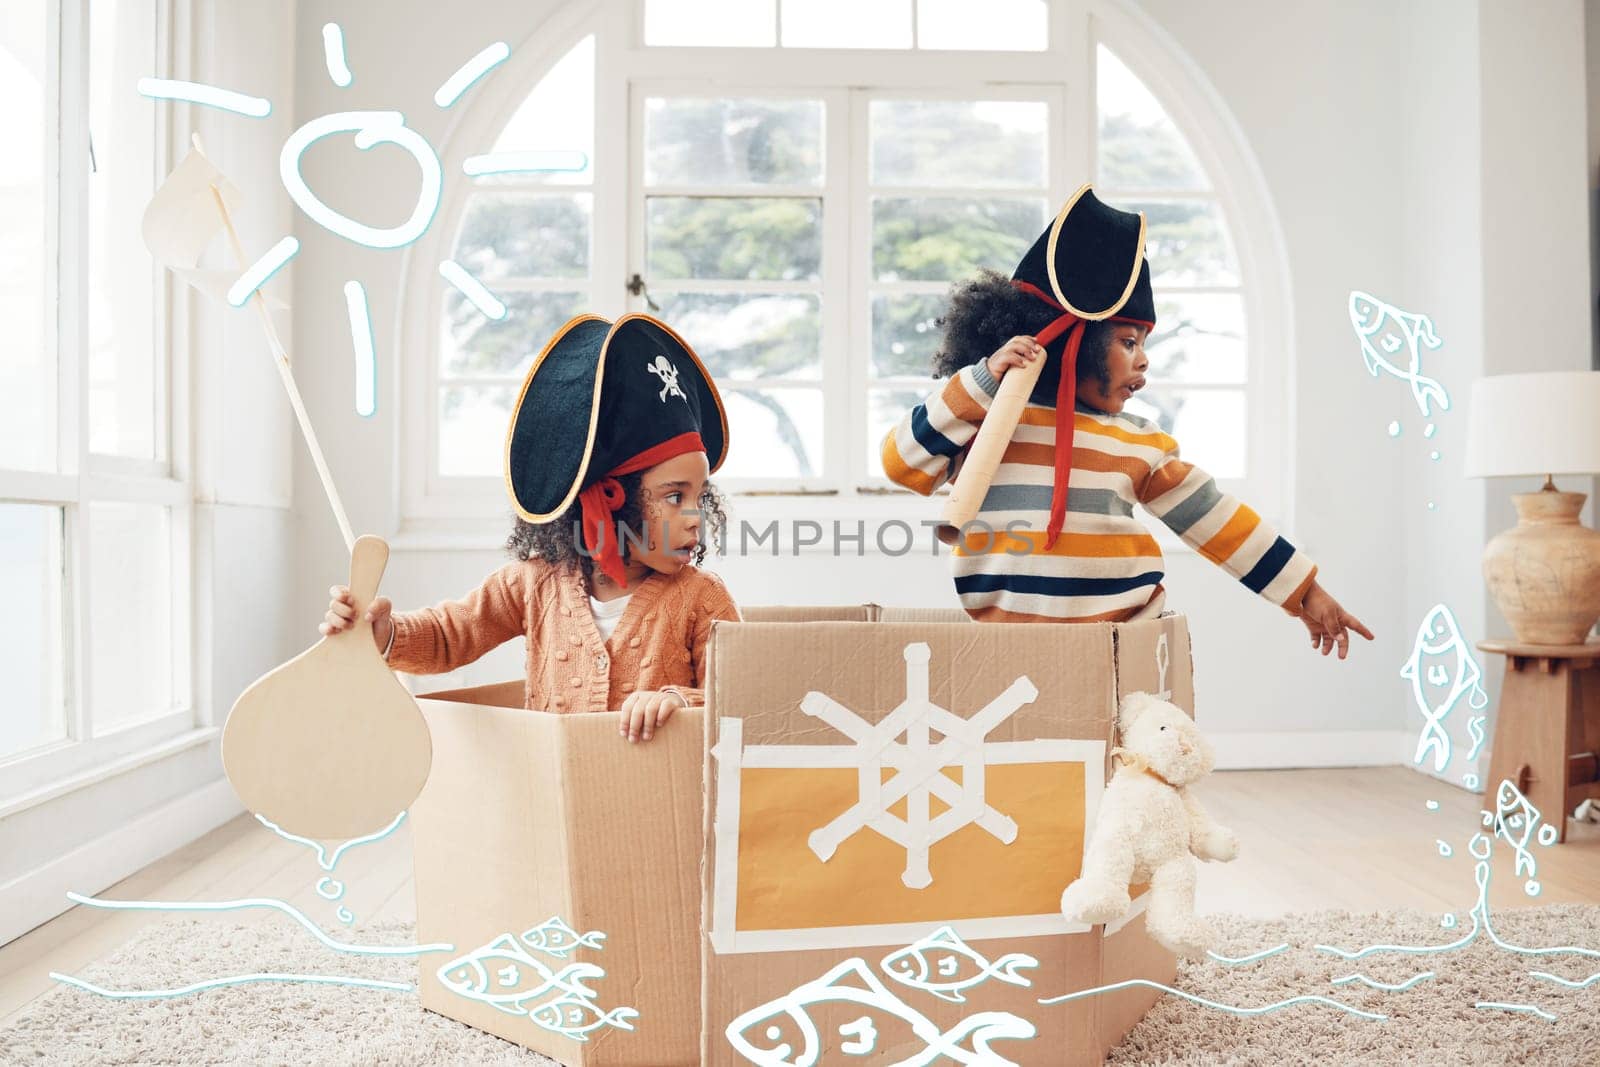 Play, box ship or pirate children point at fantasy fish, role play, or pretend in cardboard container. Boat trip, fun home game or sailing black kids on Halloween cruise journey with yacht captain.